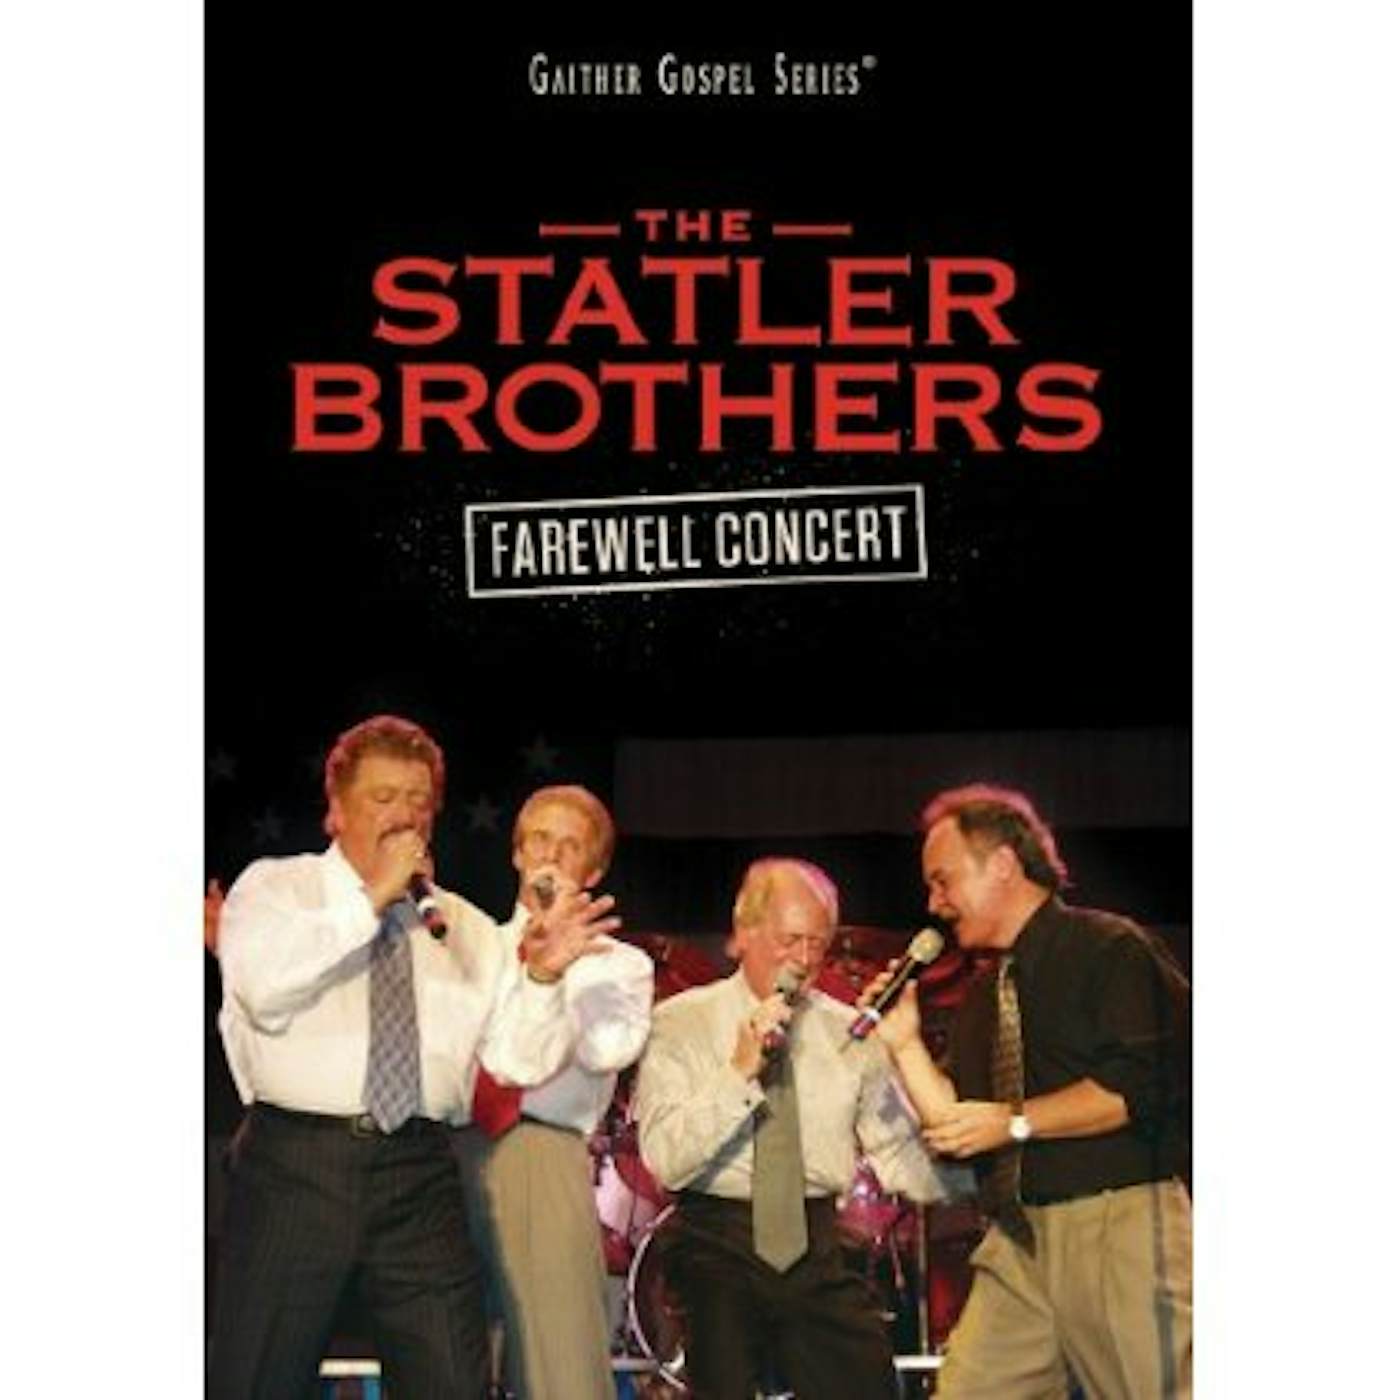 The Statler Brothers FAREWELL CONCERT DVD